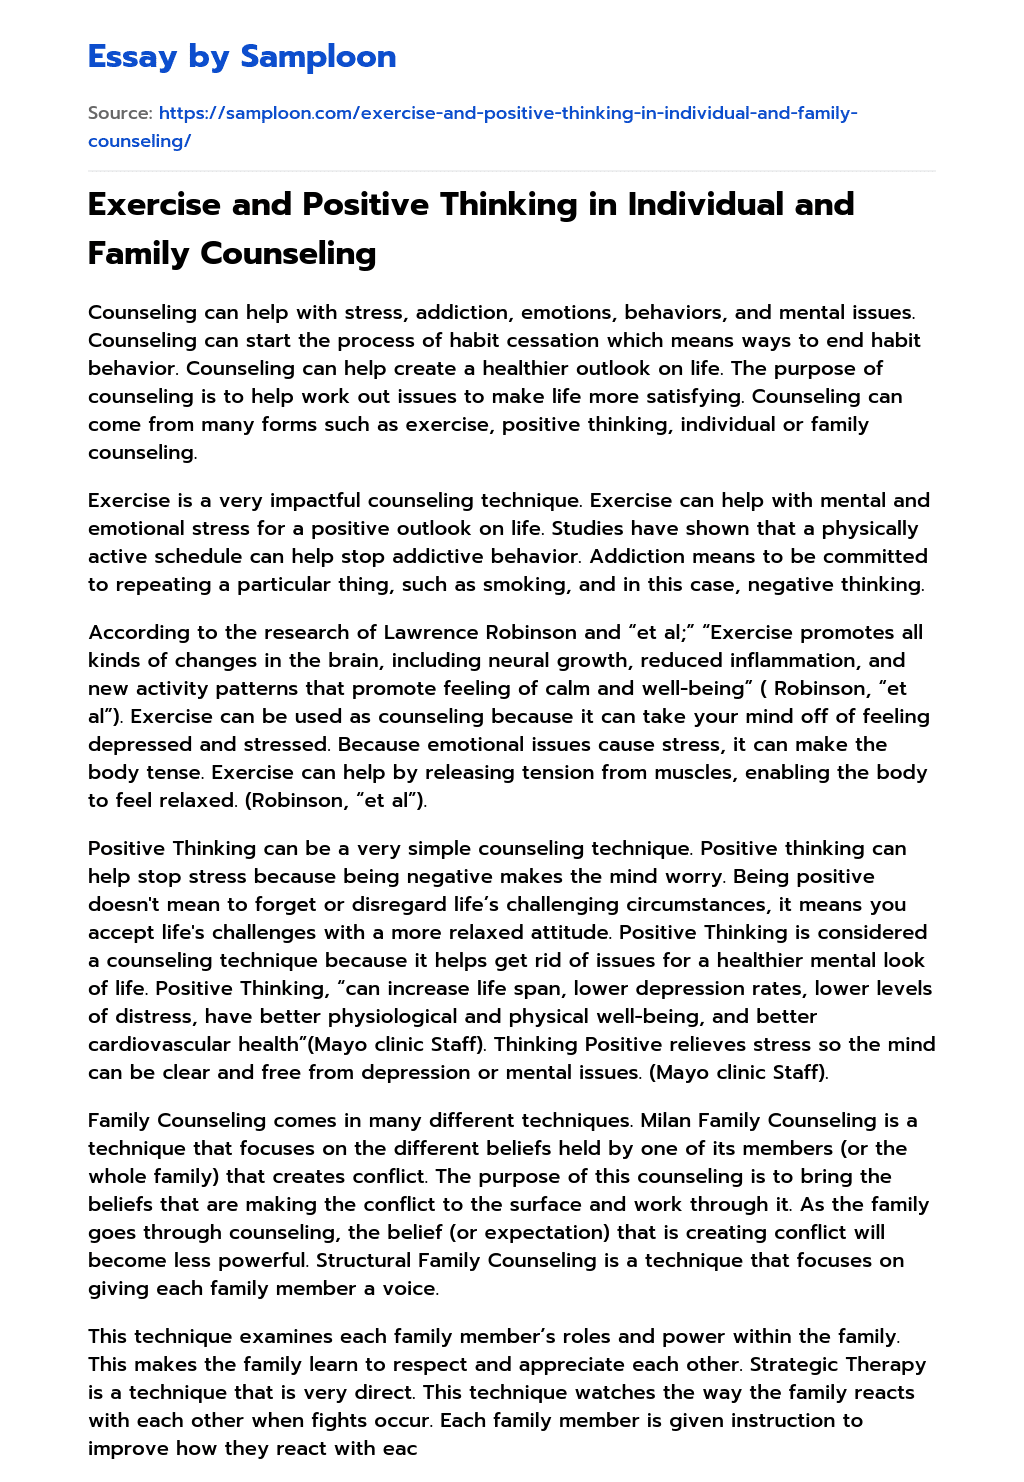 Exercise and Positive Thinking in Individual and Family Counseling essay